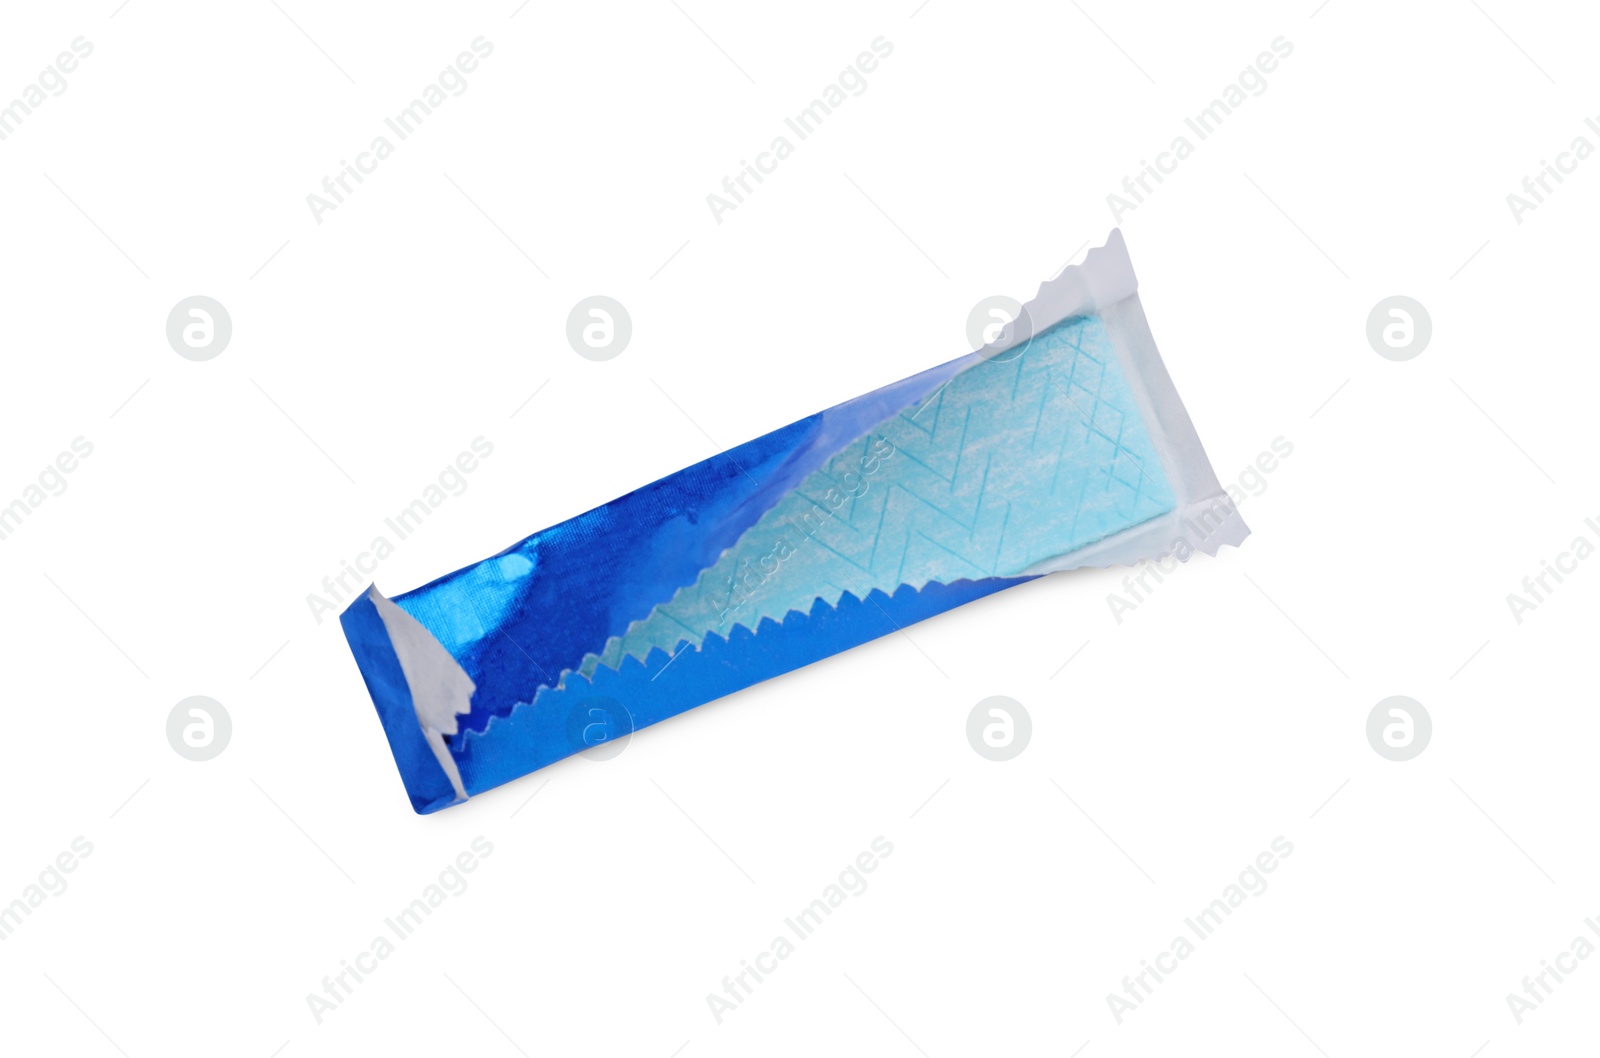 Photo of Unwrapped stick of chewing gum isolated on white, top view